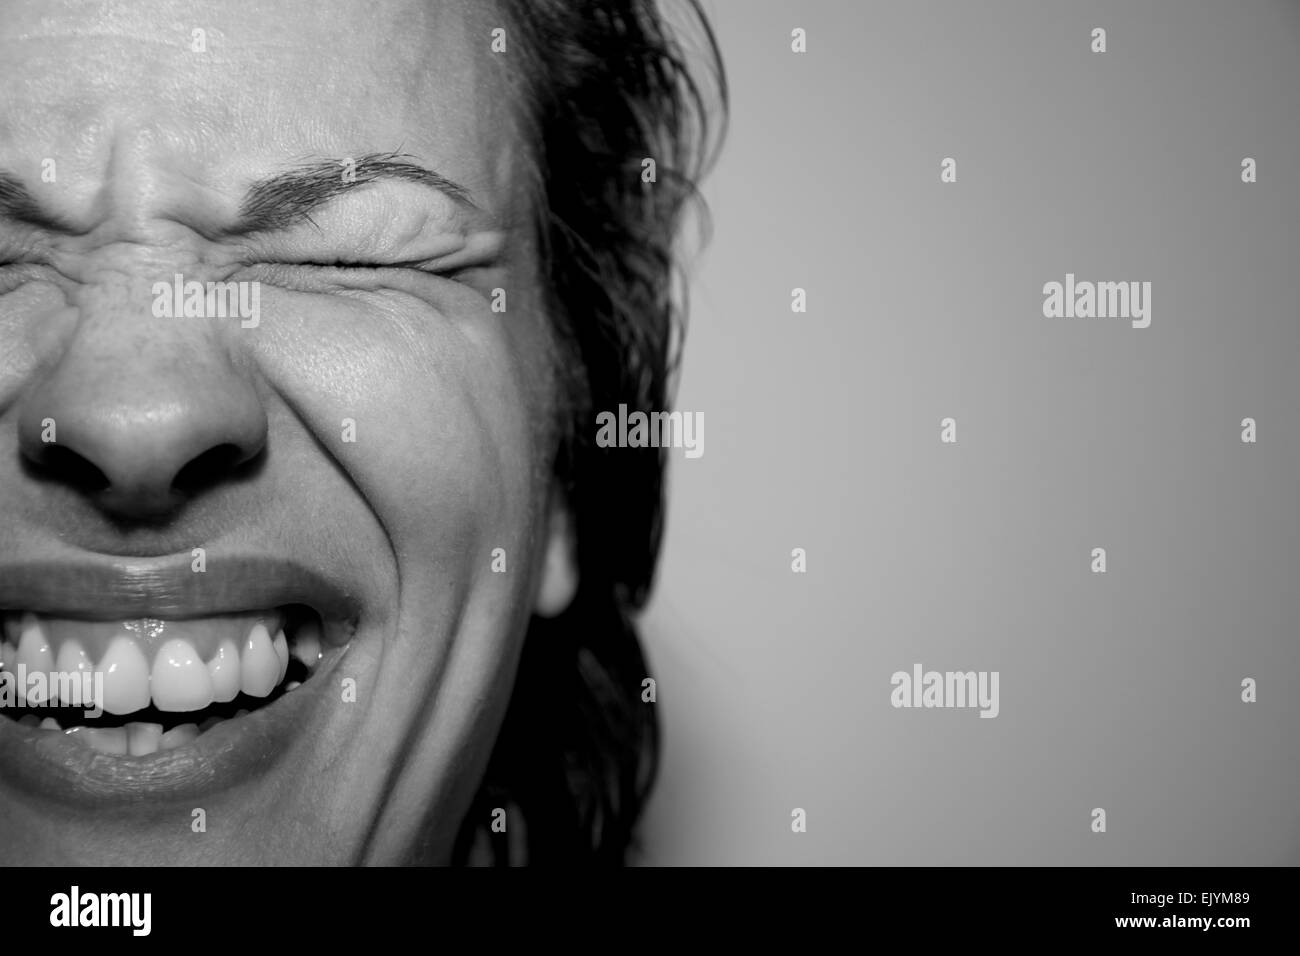 Closeup portrait of a pretty young woman laughing with closed eyes in monochrome indoors Stock Photo